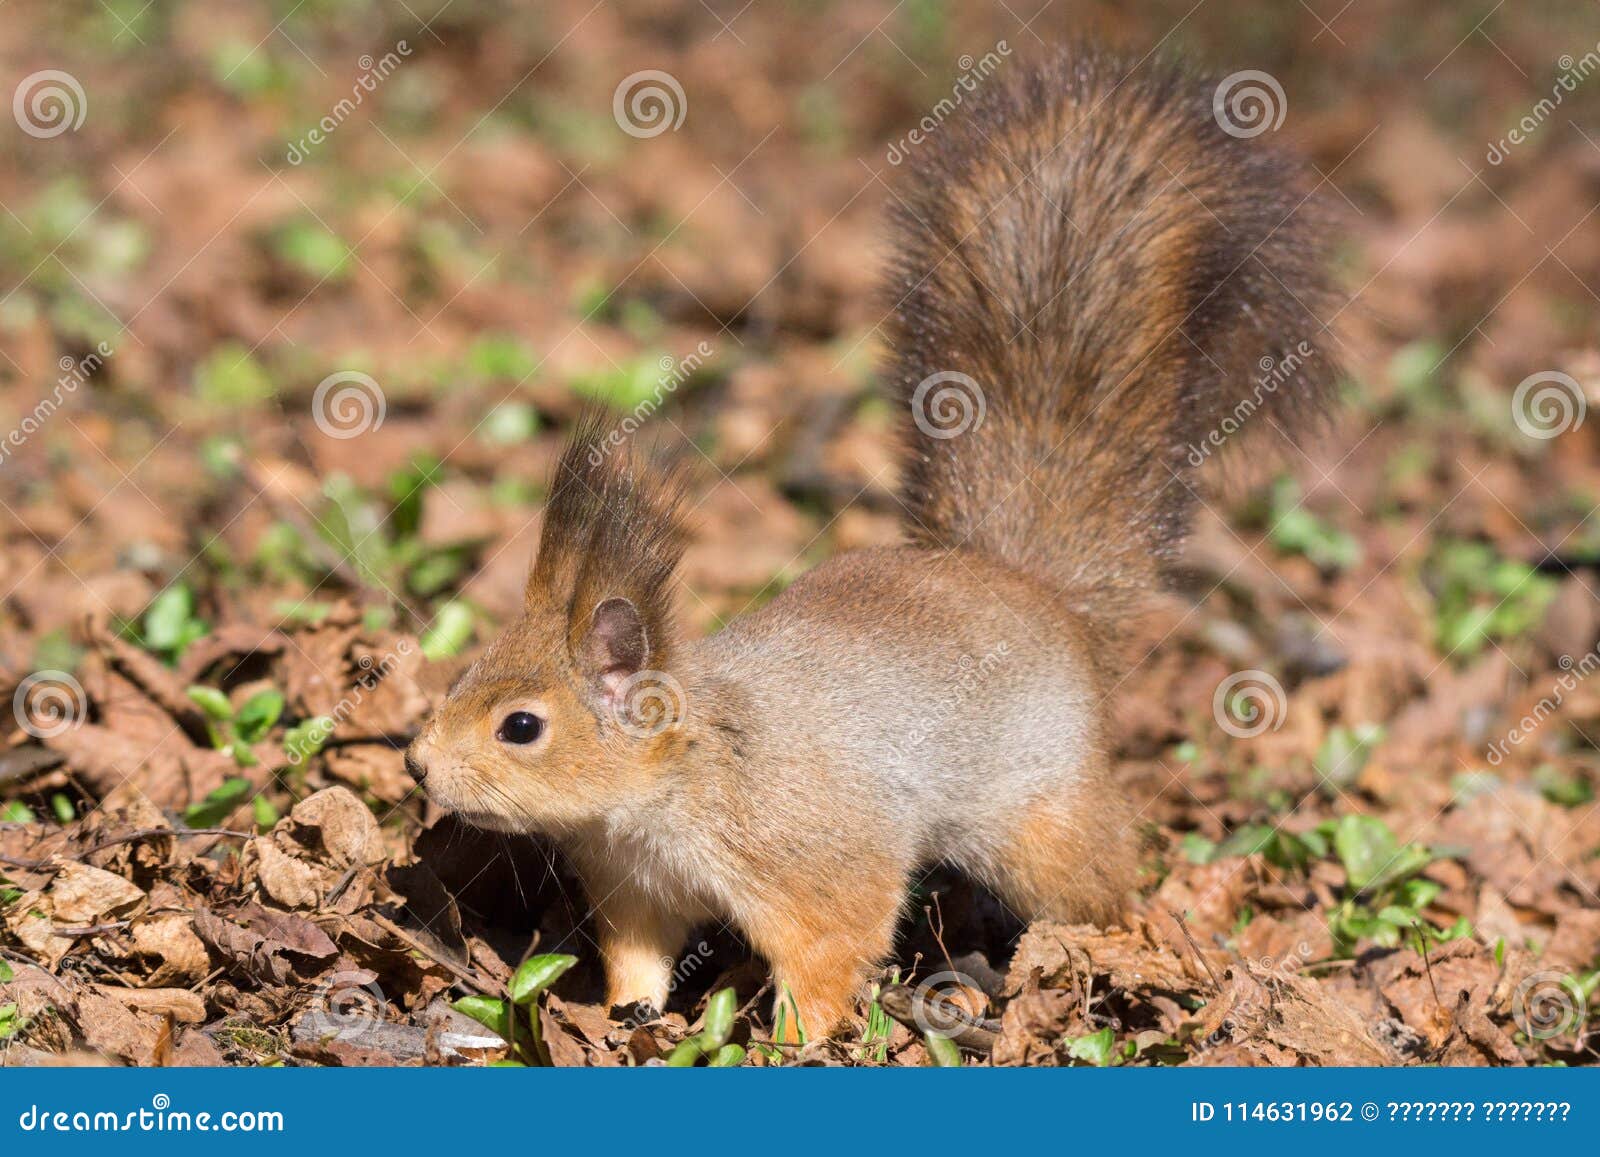 why do red squirrels trim trees